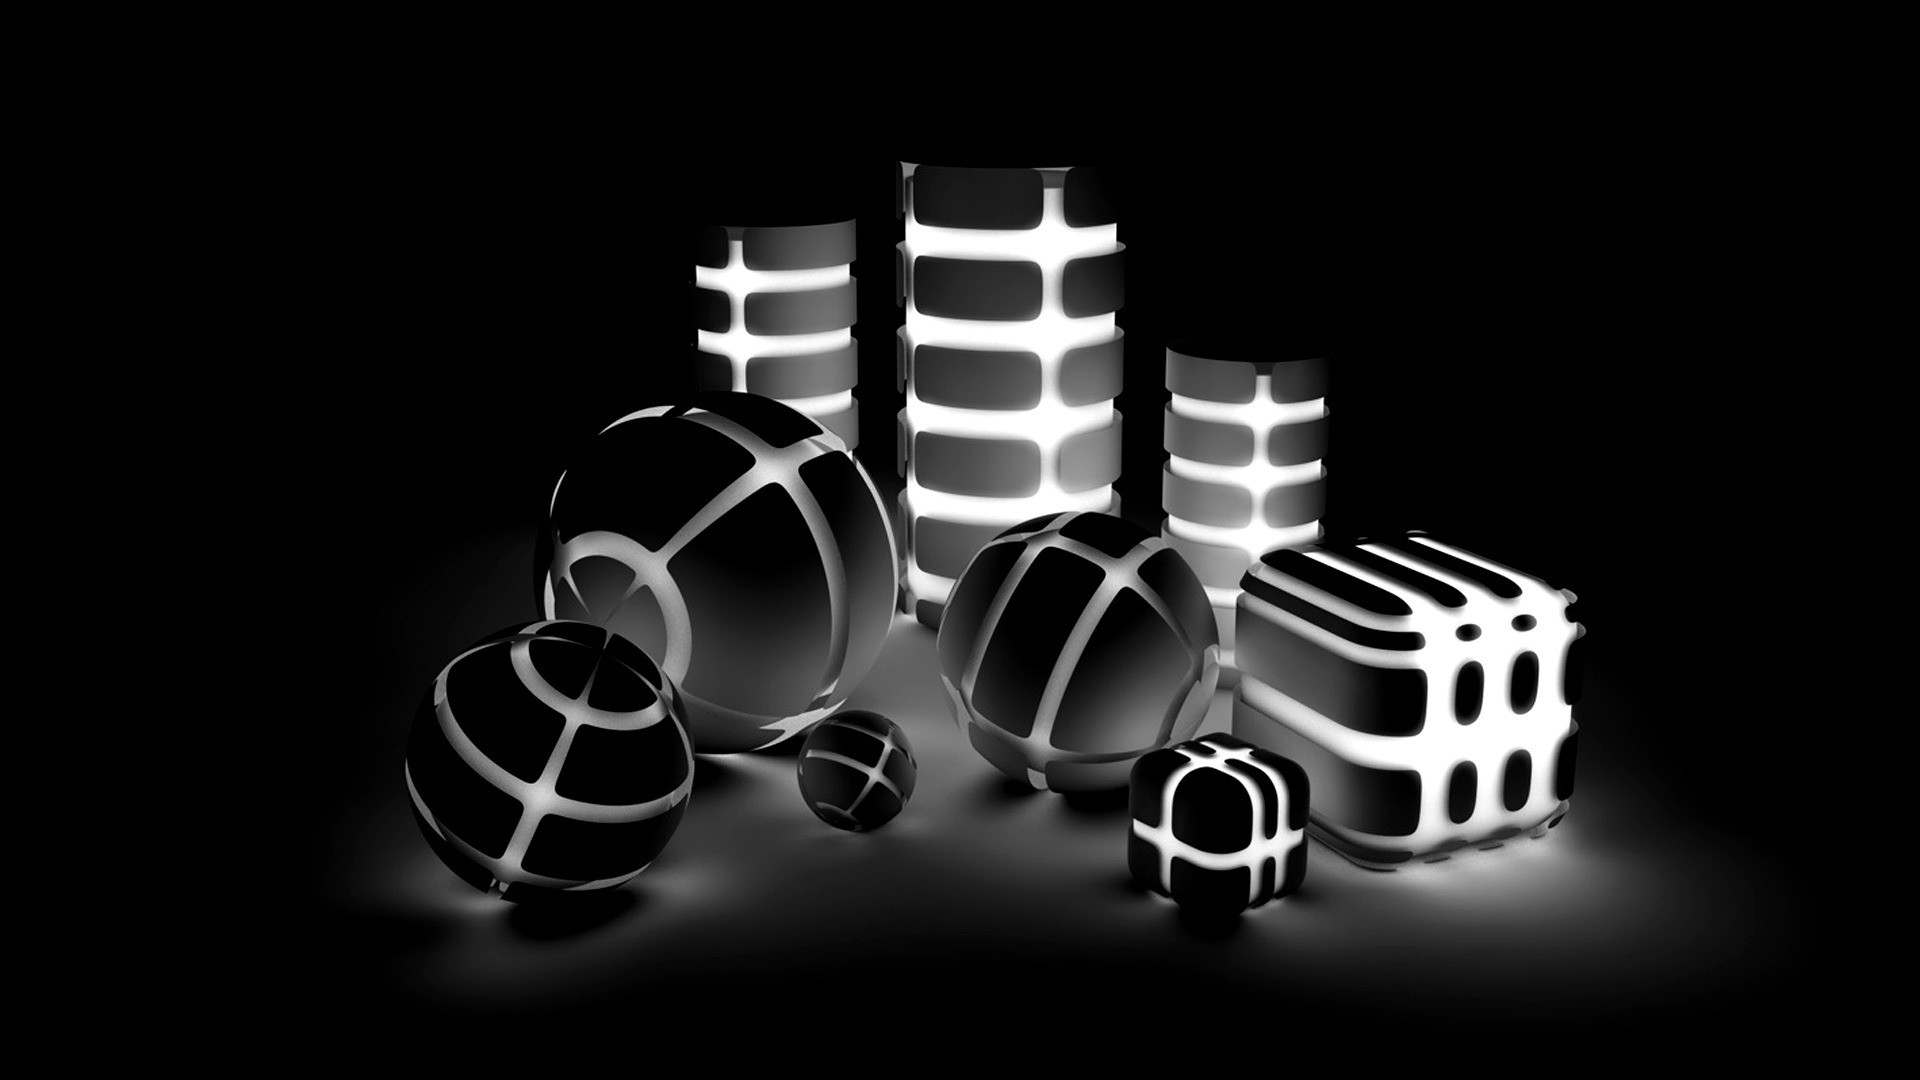 1920x1080 Wallpapers Black and White HD Wallpaper 3D Wallpapers Black and White .